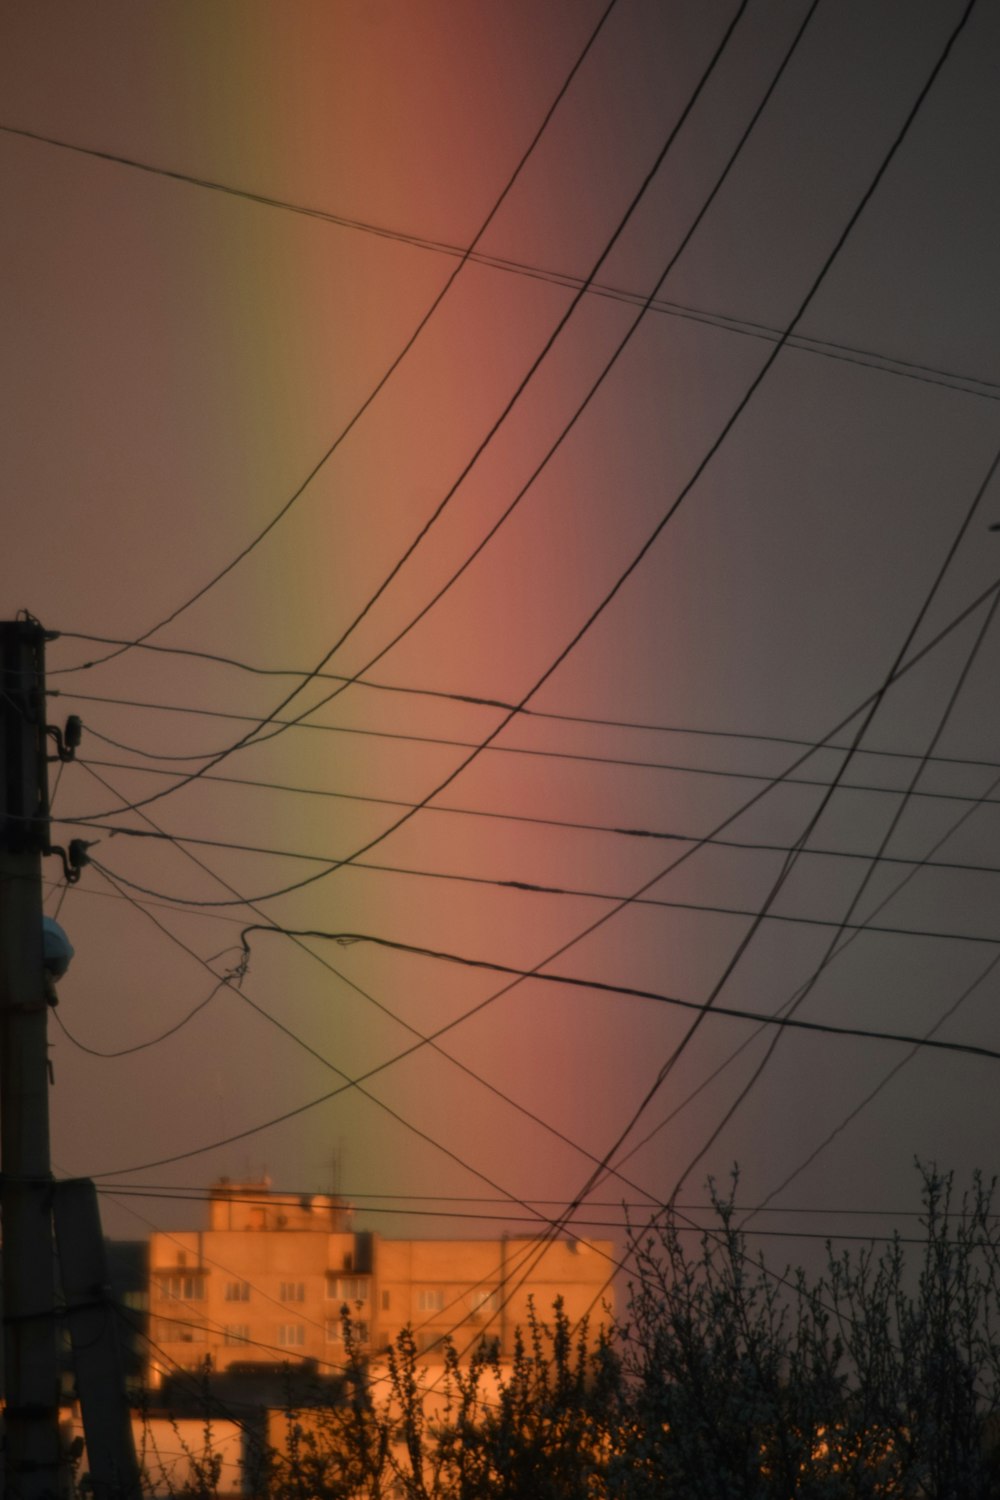 a rainbow in the sky with power lines in the foreground